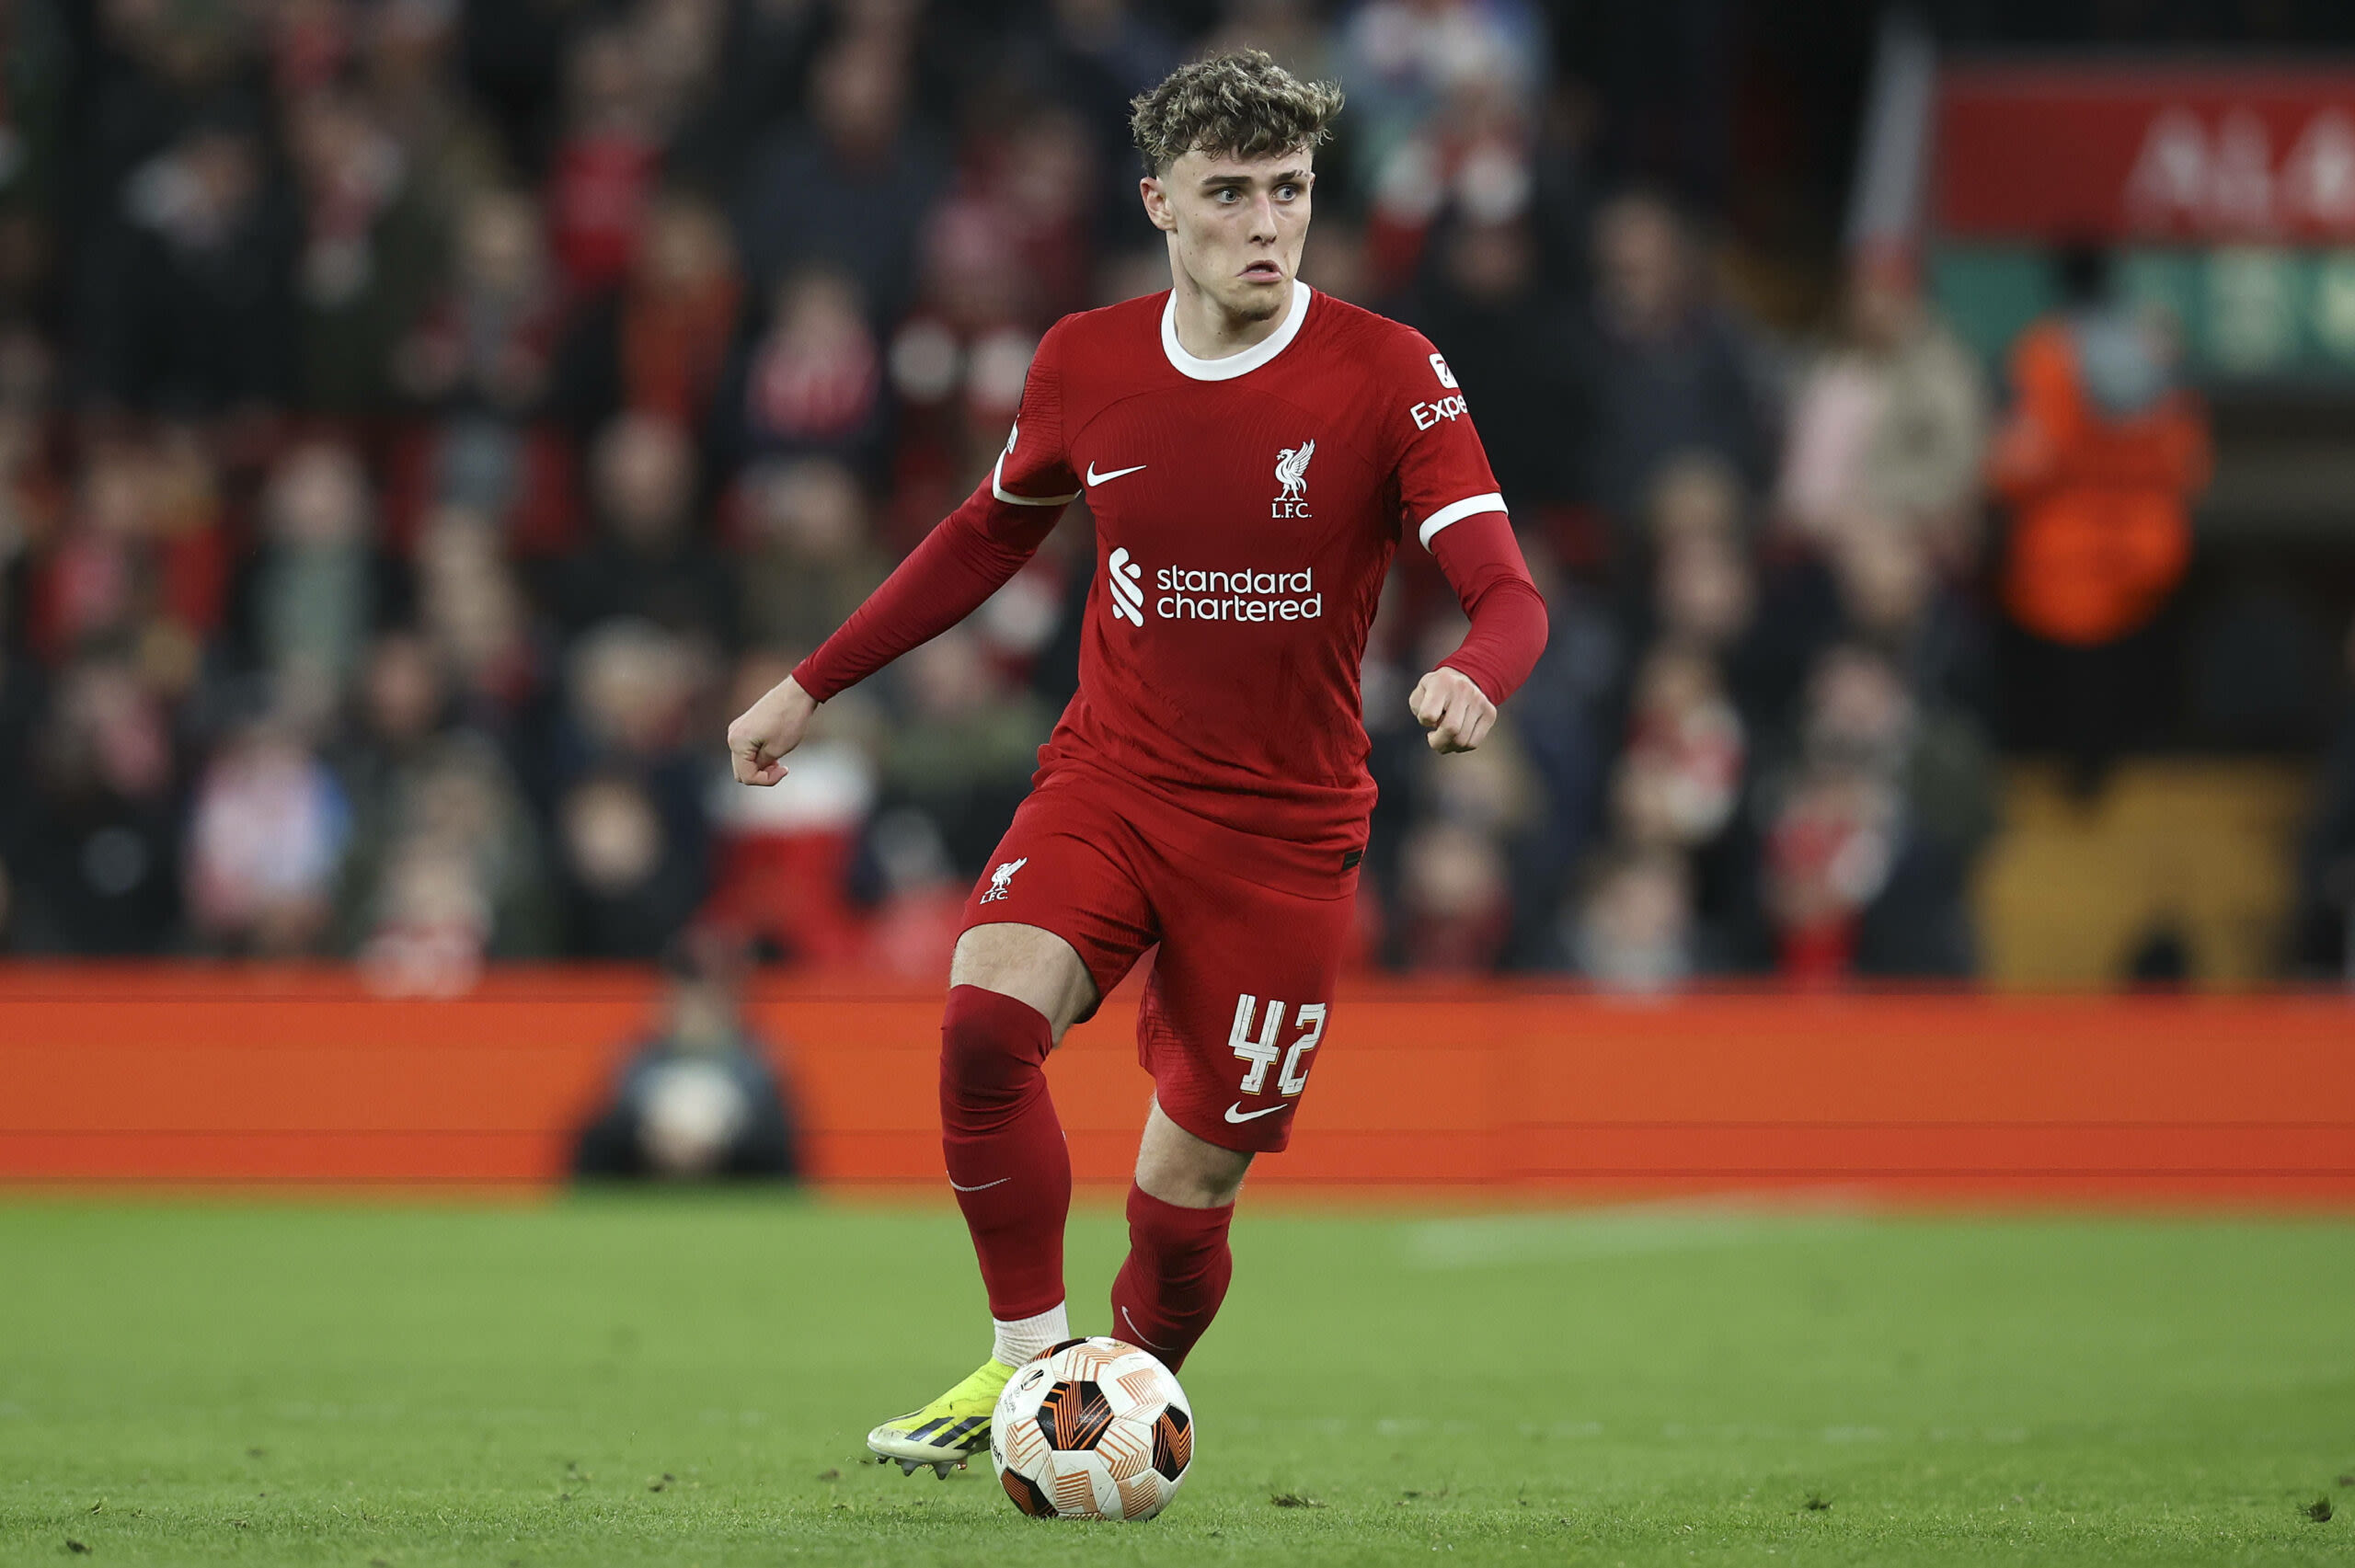 David Lynch: Liverpool Future Star – New Contract and Loan Rumours?